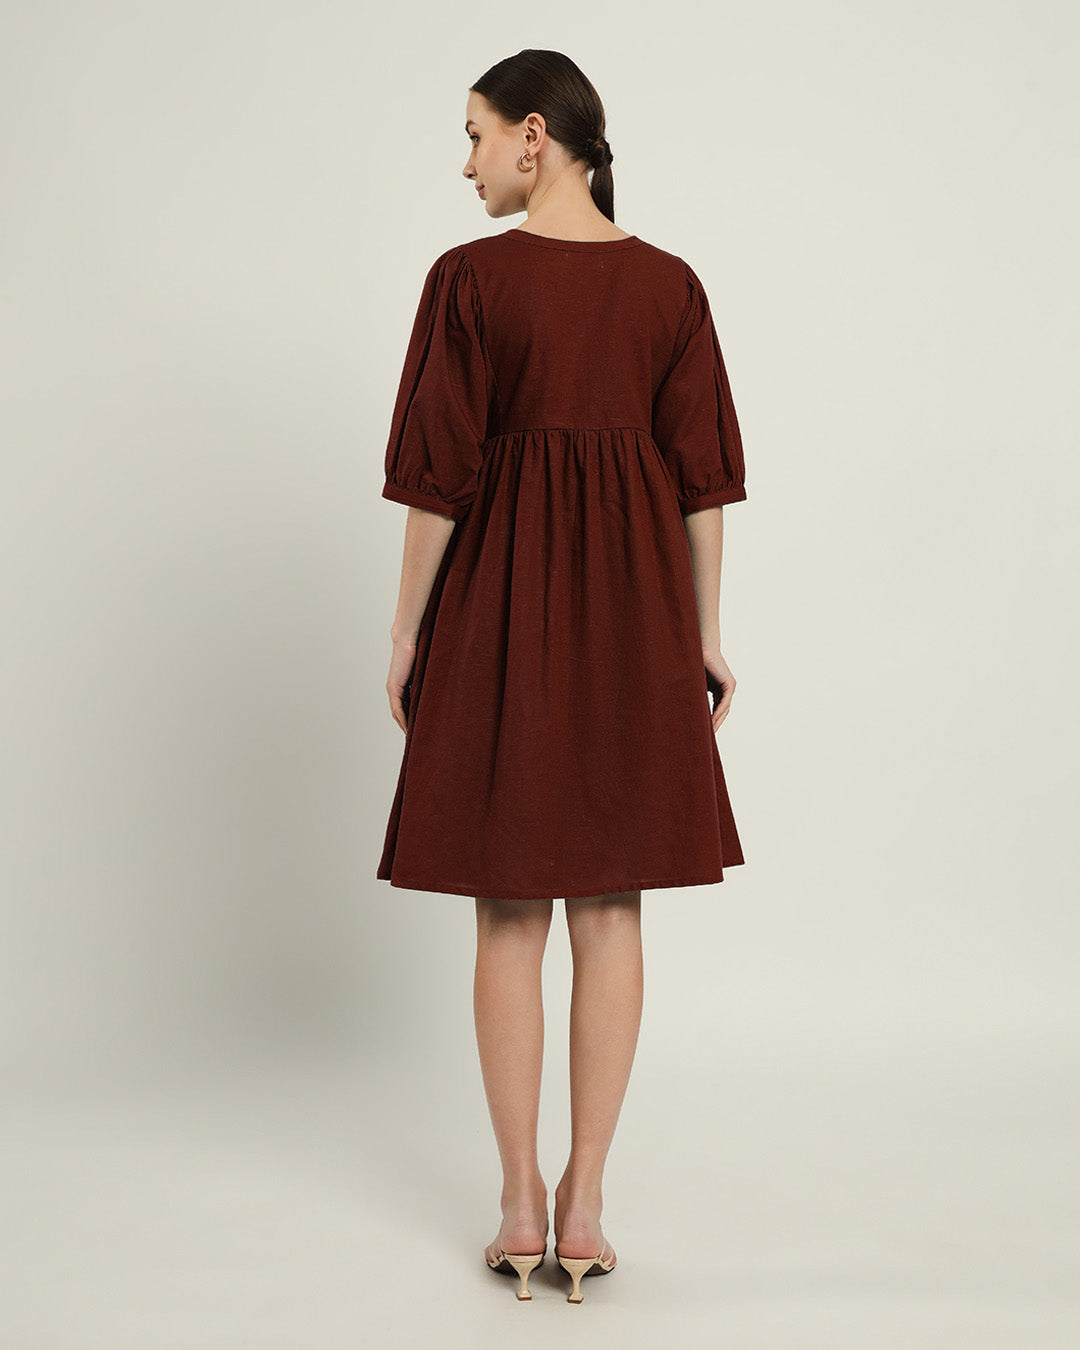 The Aira Rouge Cotton Dress